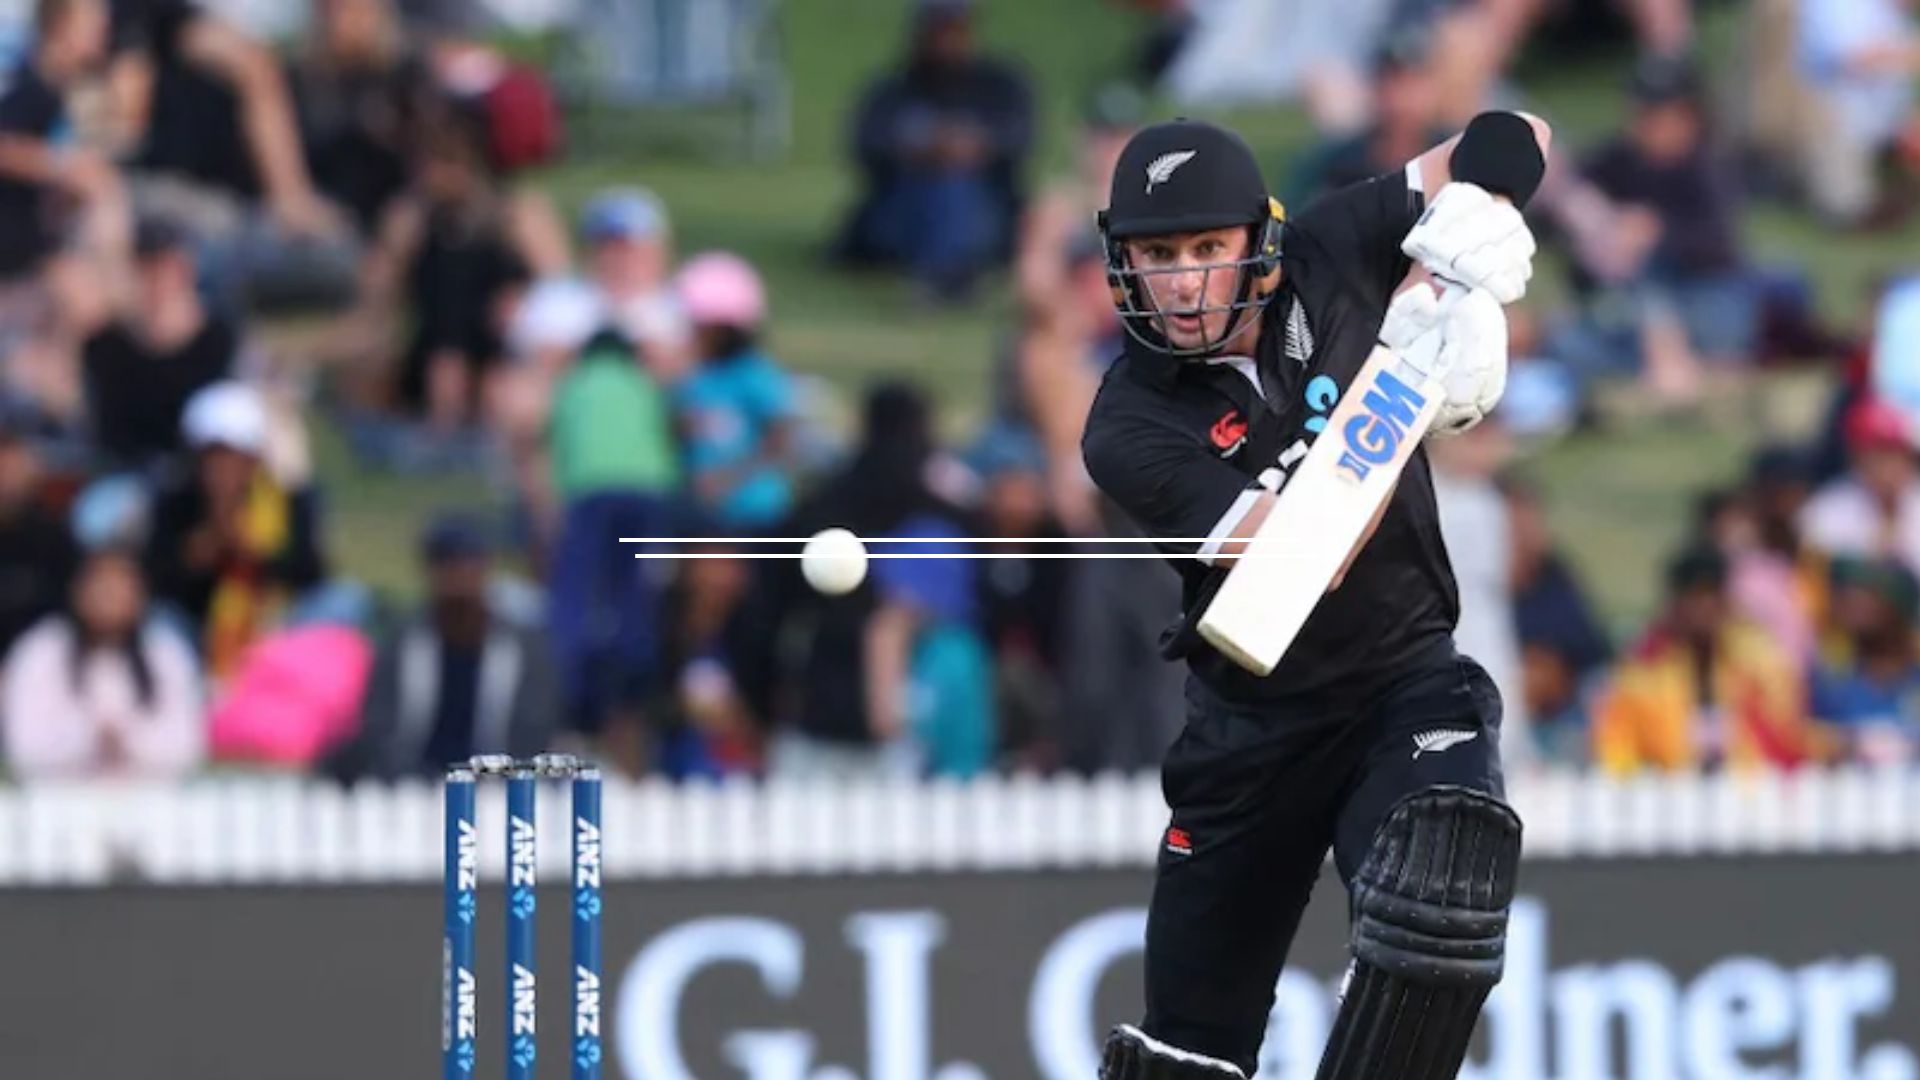 Tough Day on the Pitch: Will Young Opens Up About New Zealand’s Defeat to Bangladesh in 3rd ODI